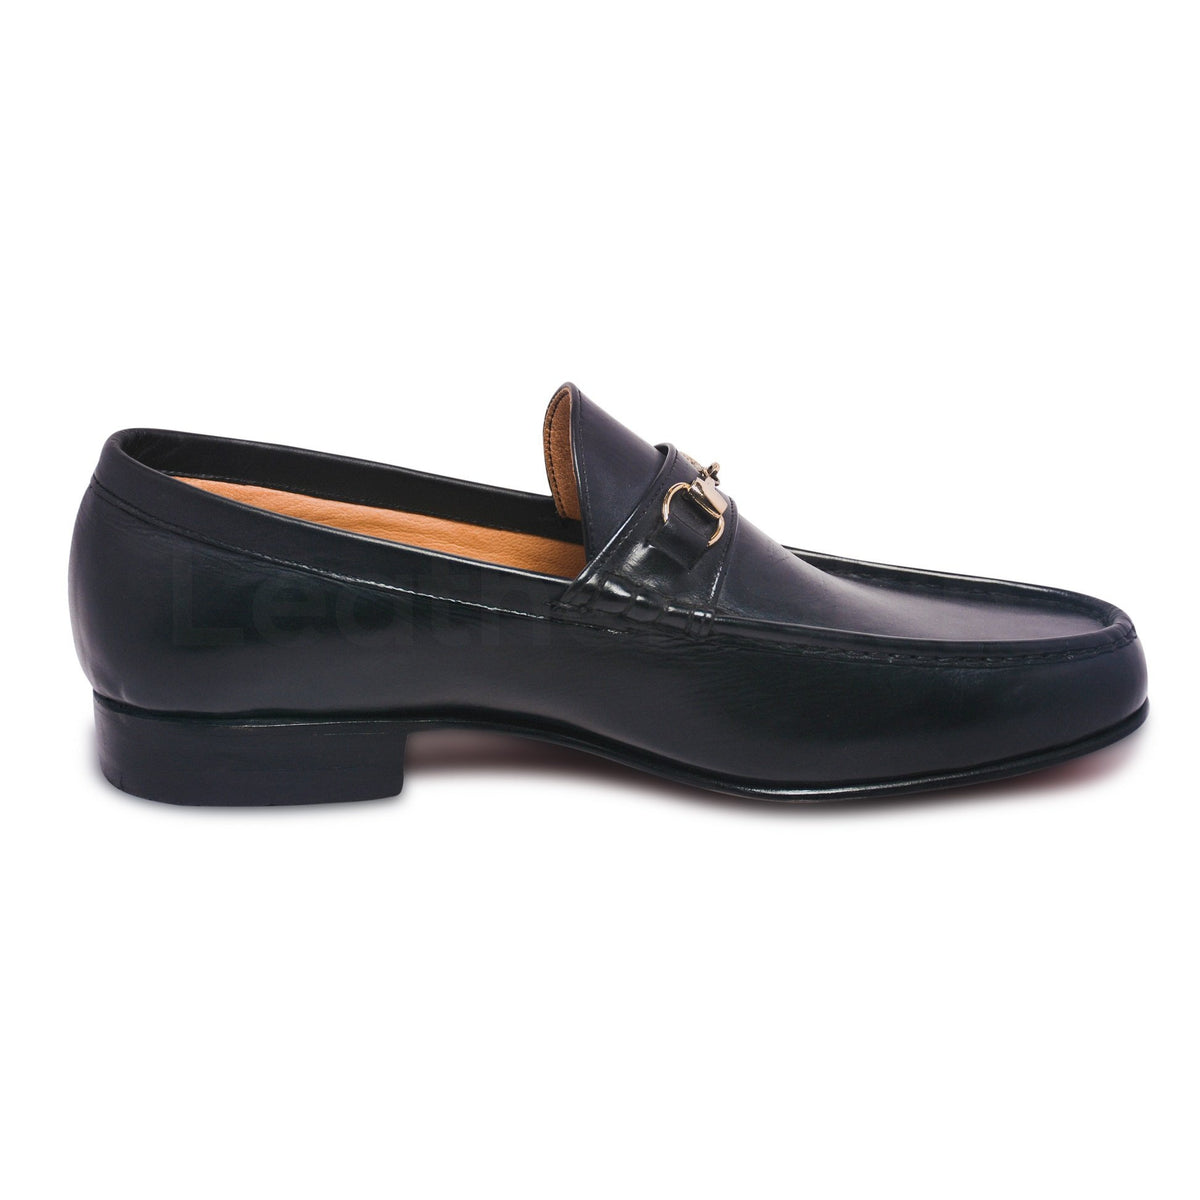 Loafers Slip ons